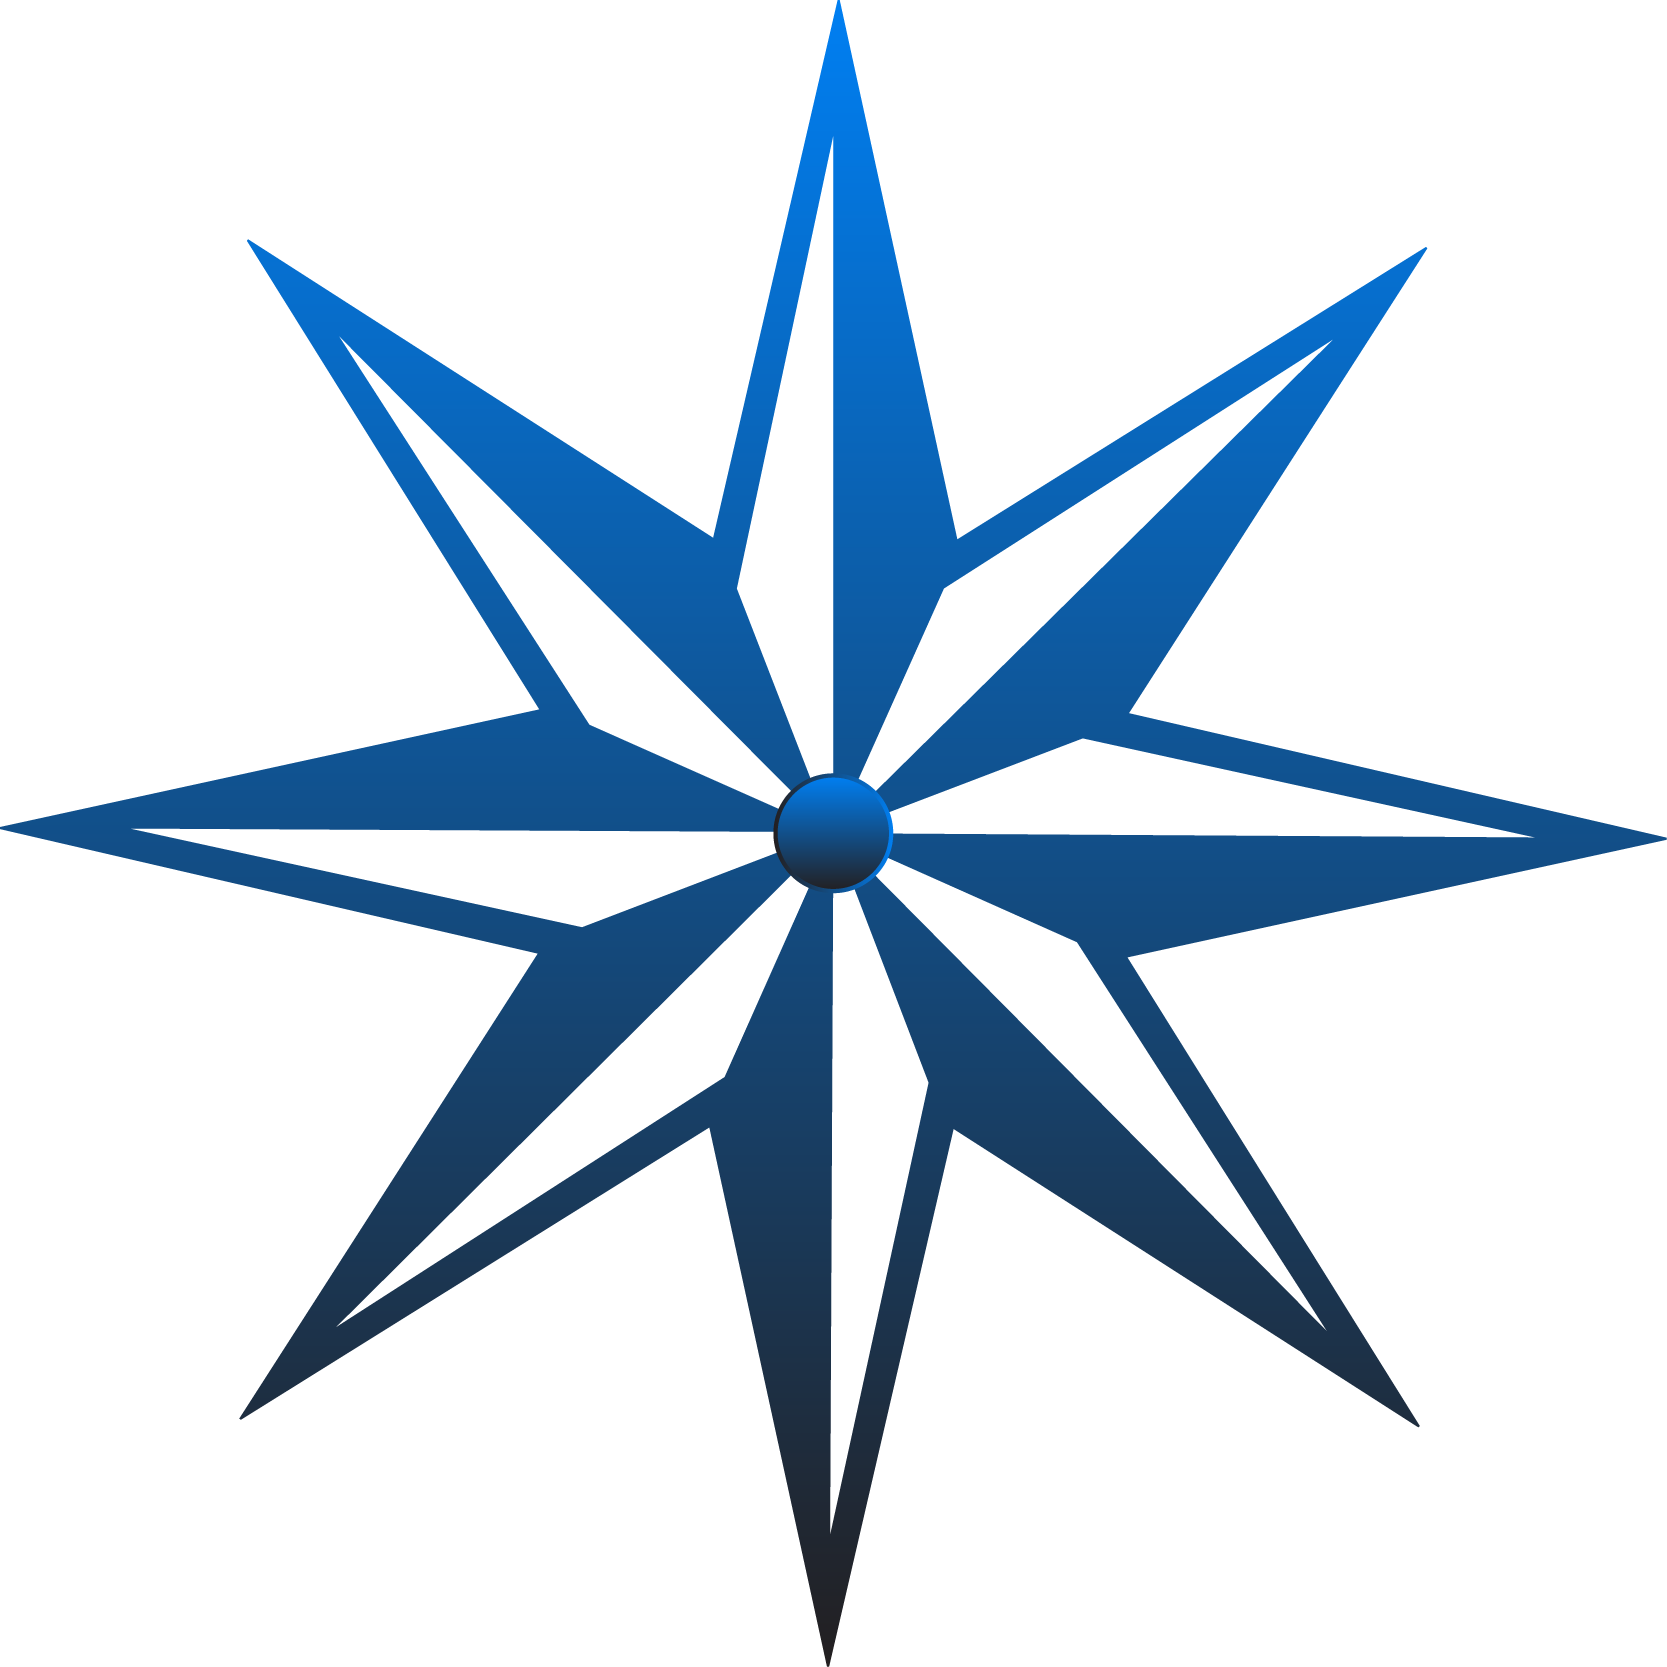 Links - Drawing Of A Compass Rose (1667x1667)